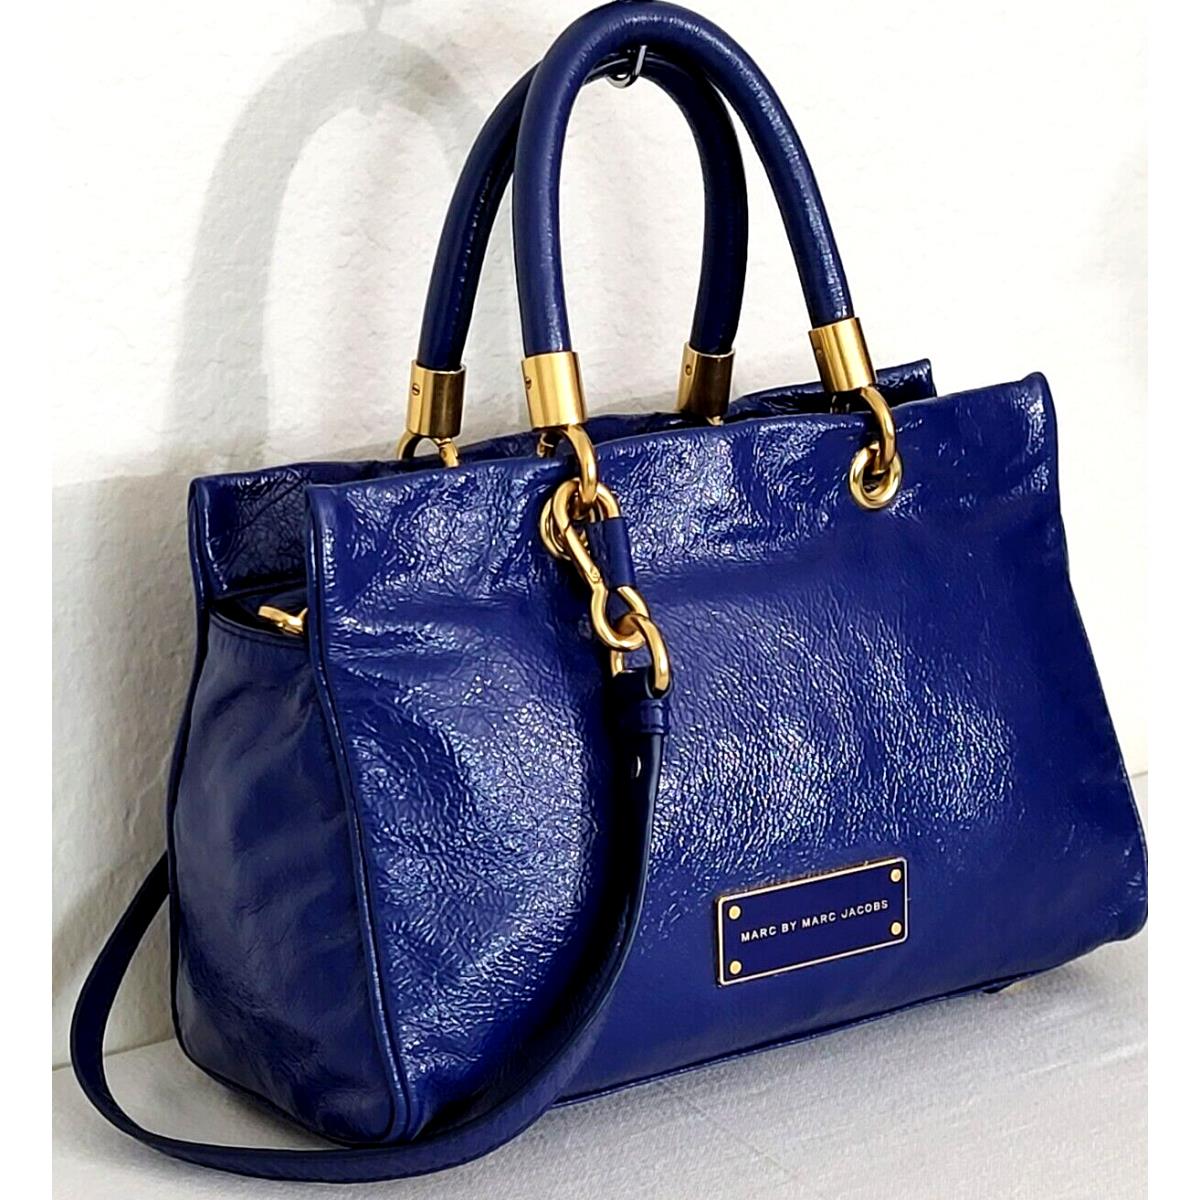 Marc Jacobs  bag  TOO HOT HANDLE - Blue Handle/Strap, Gold Hardware, BRIGHT ROYAL BLUE Exterior 1